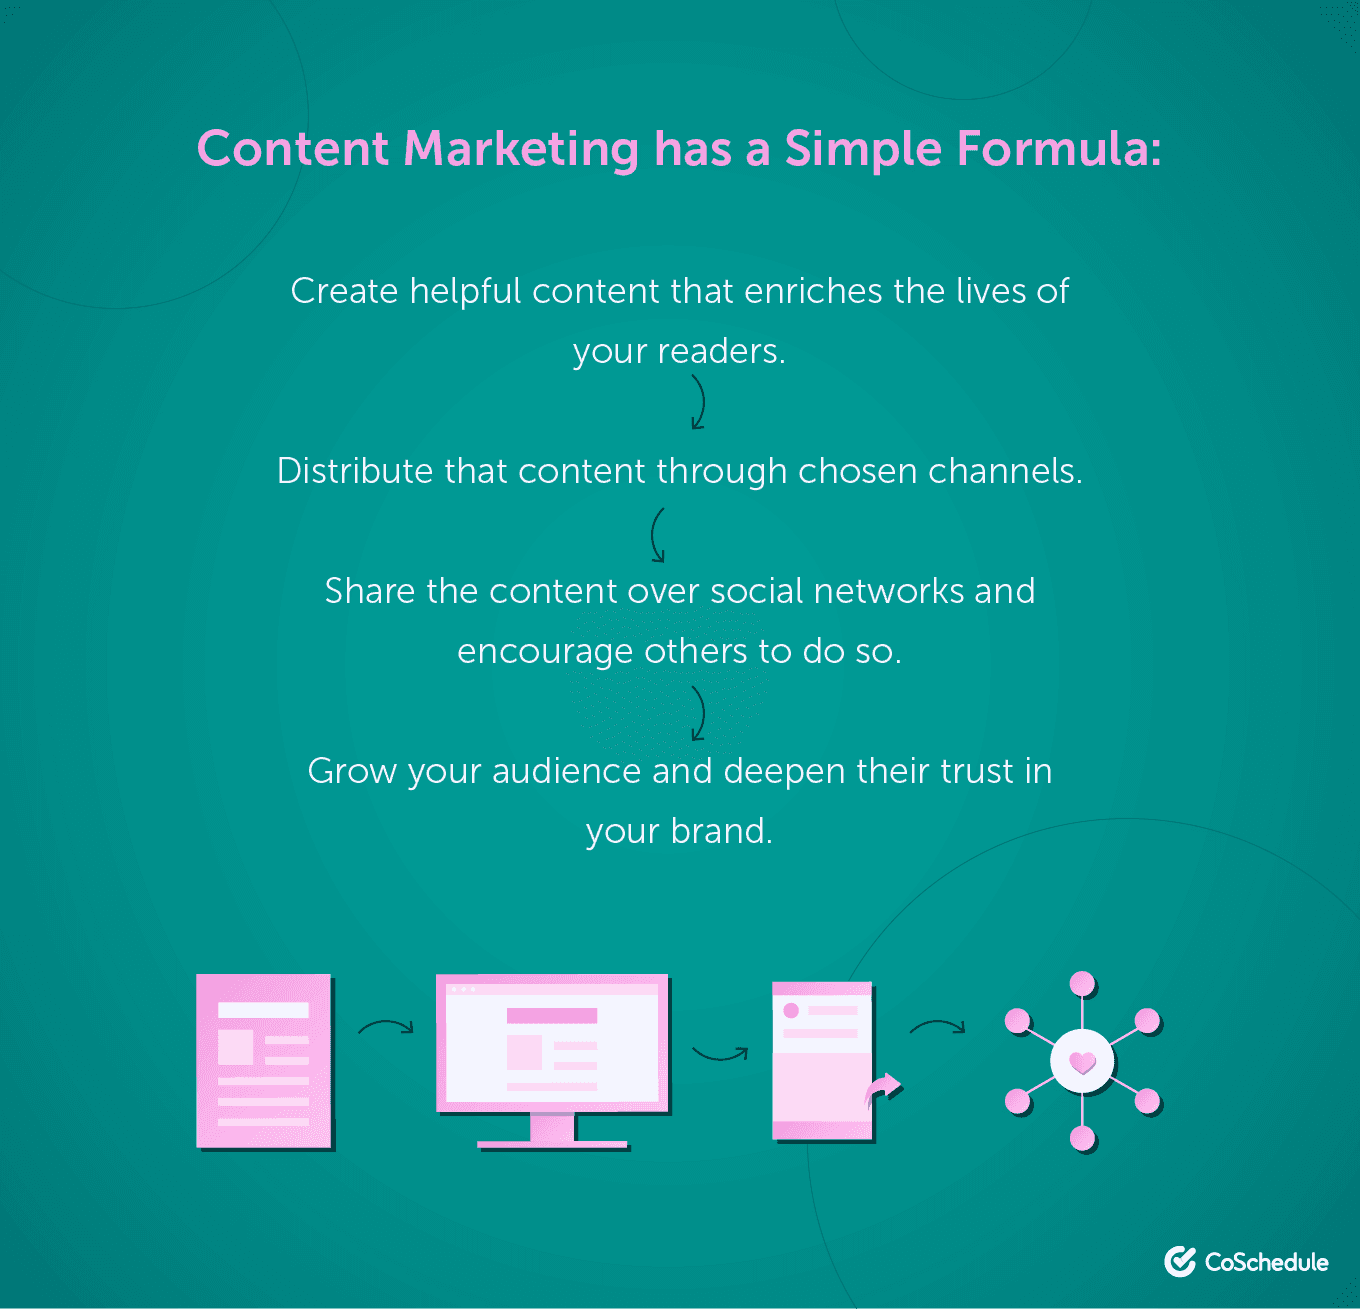 Simple Content Marketing Formula for Small Business